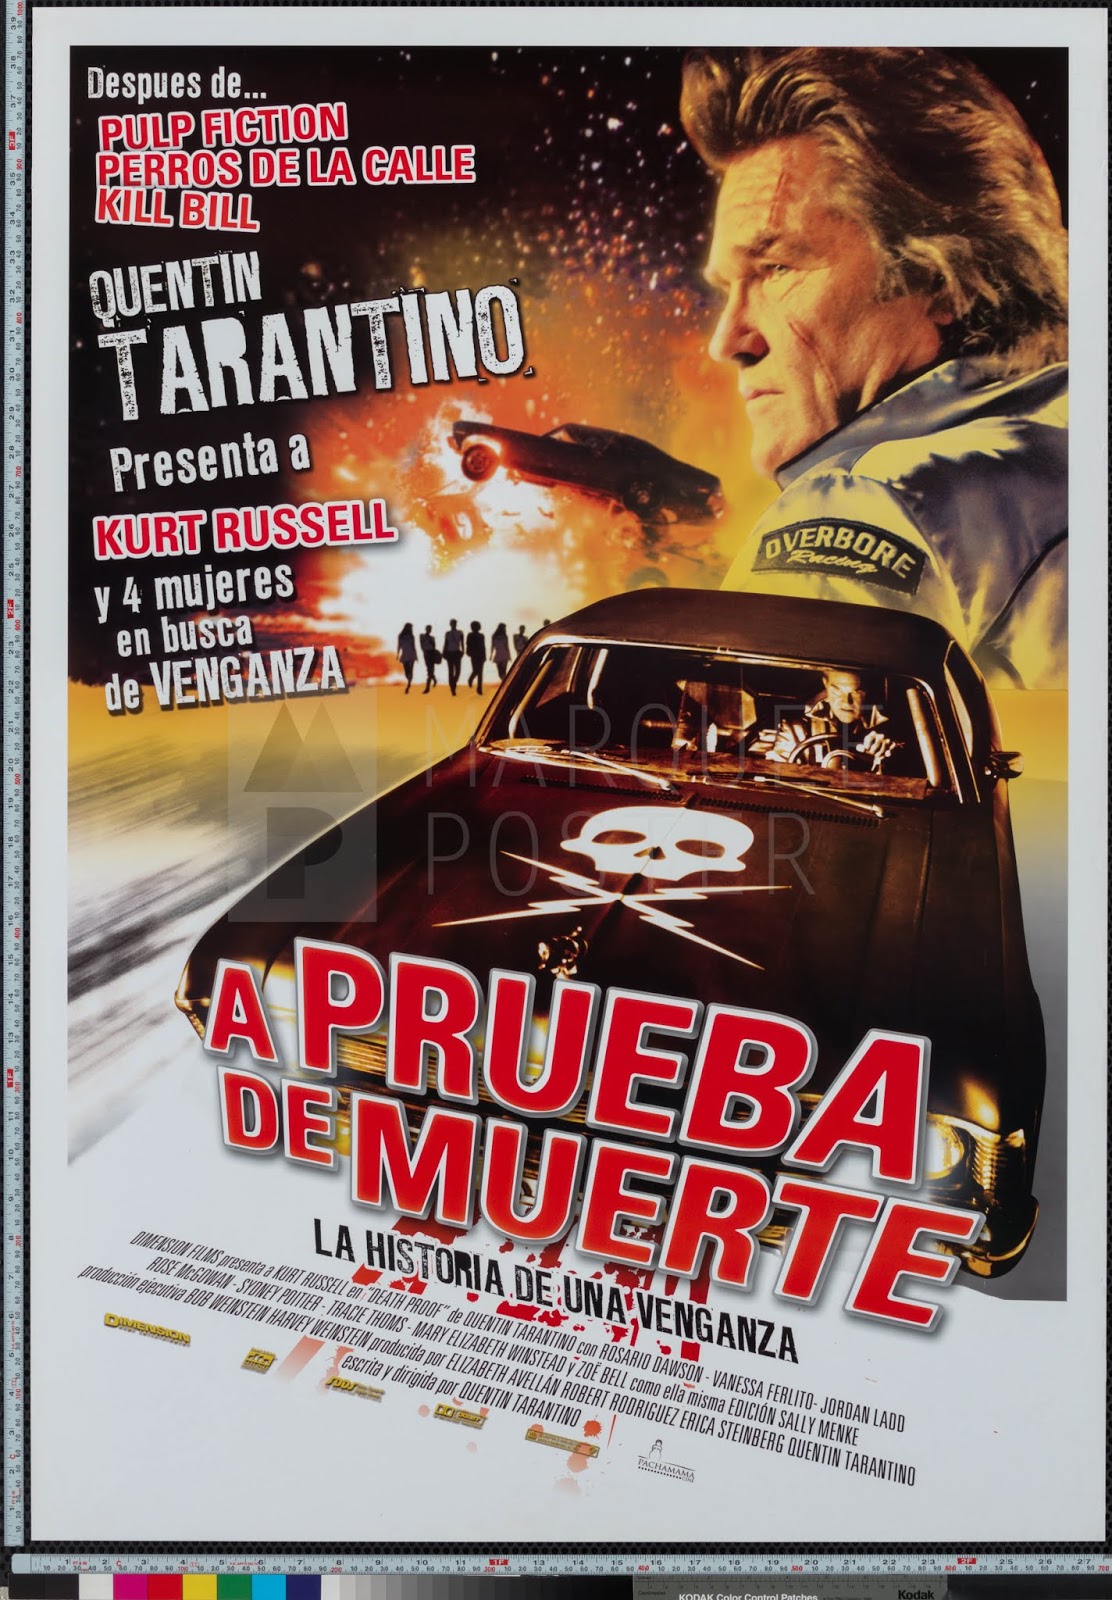 Dave's Movie Site: The Films of Quentin Tarantino: Death Proof (2007)